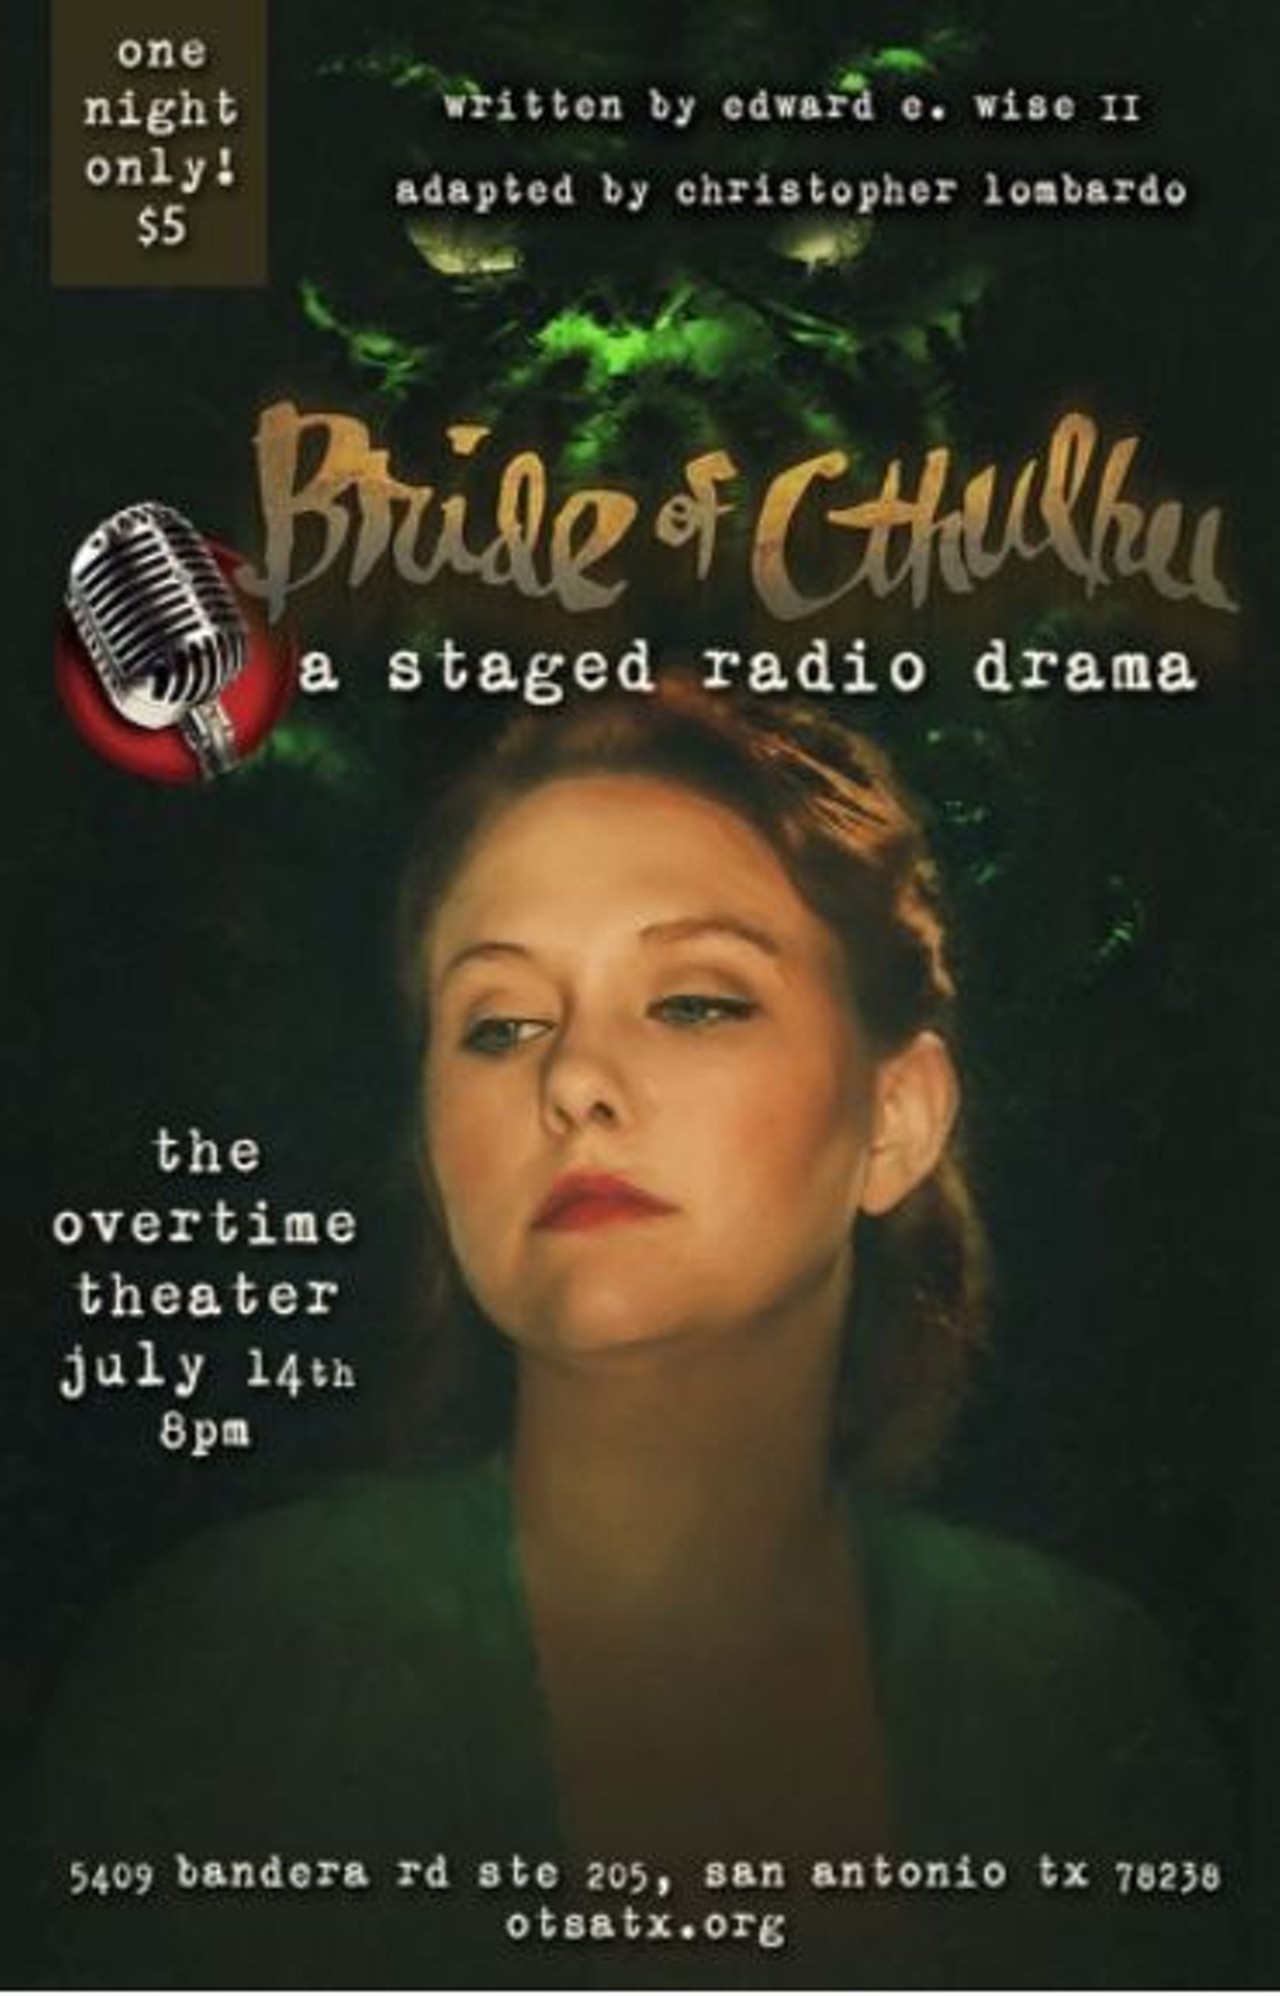 Bride of Cthulhu 
Fri., July 14, 8 p.m., $5, The Overtime Theater